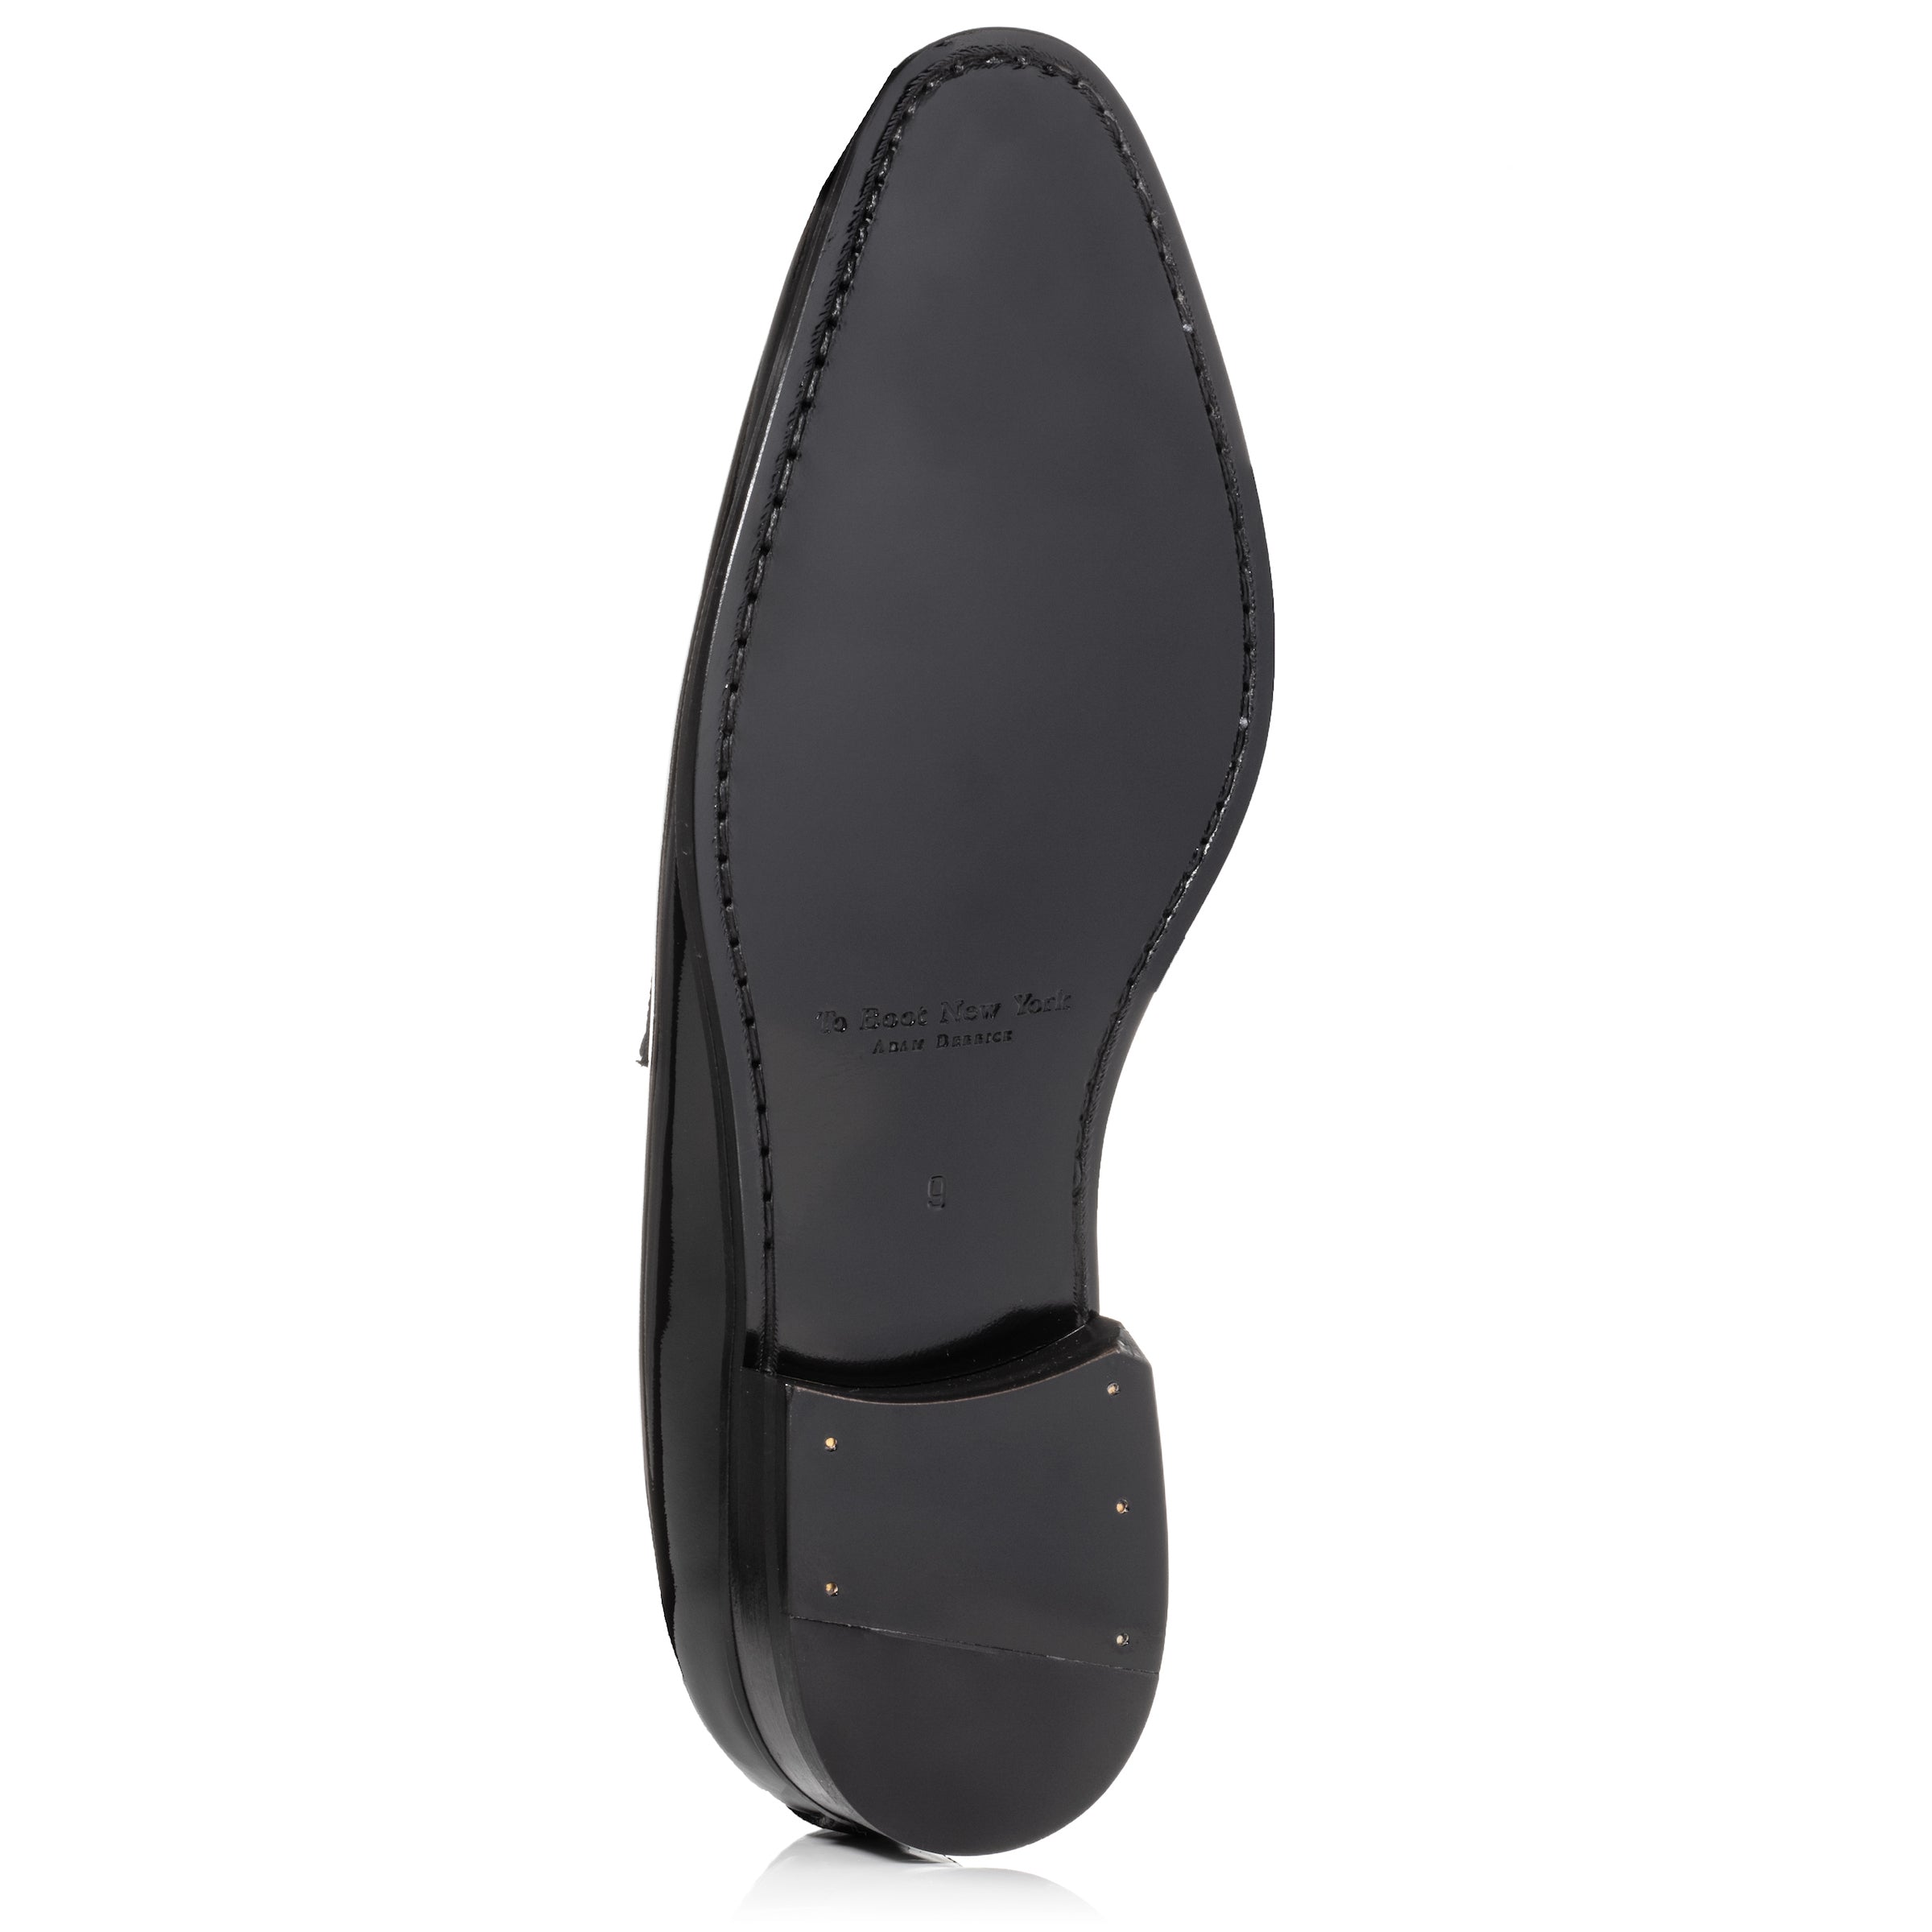 Rhodes Black Patent Leather Loafer